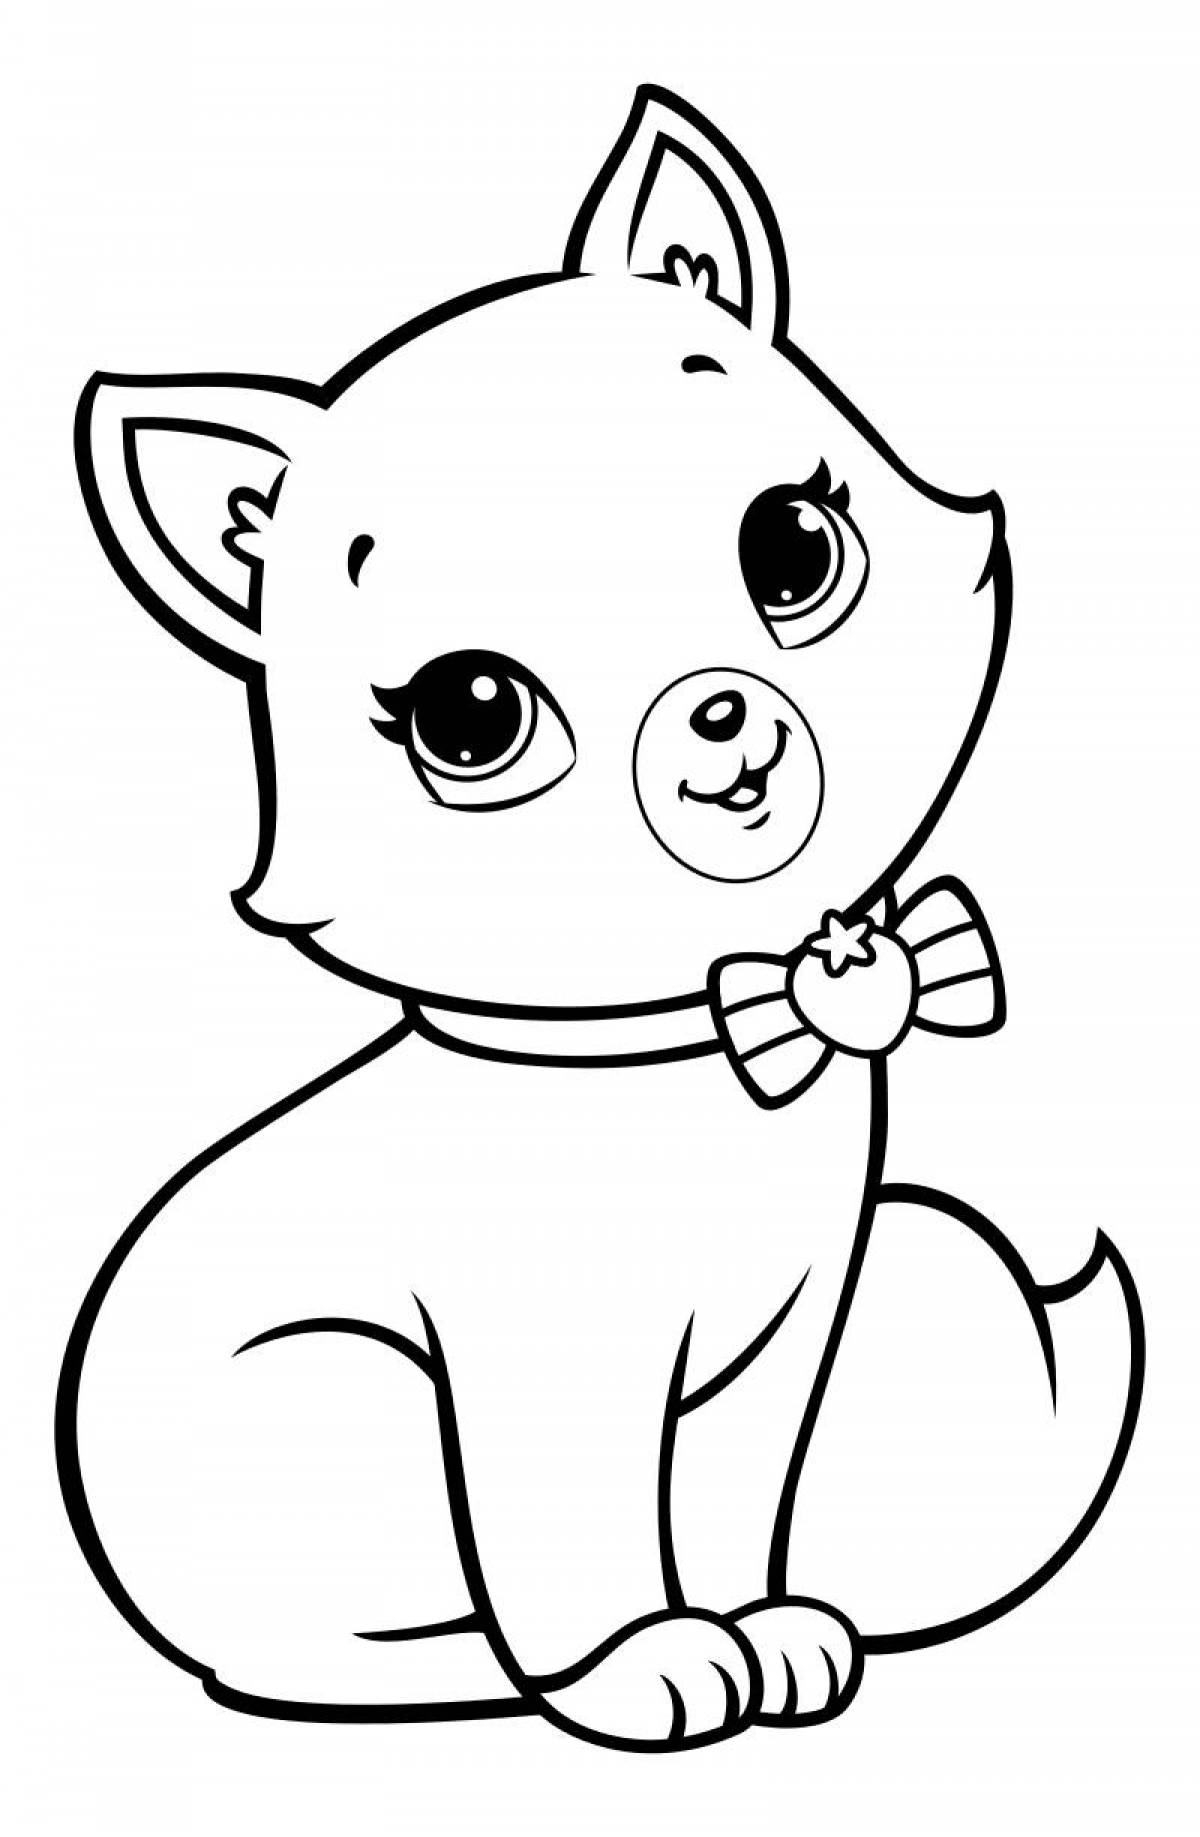 Coloring pages with big smiles dogs kittens